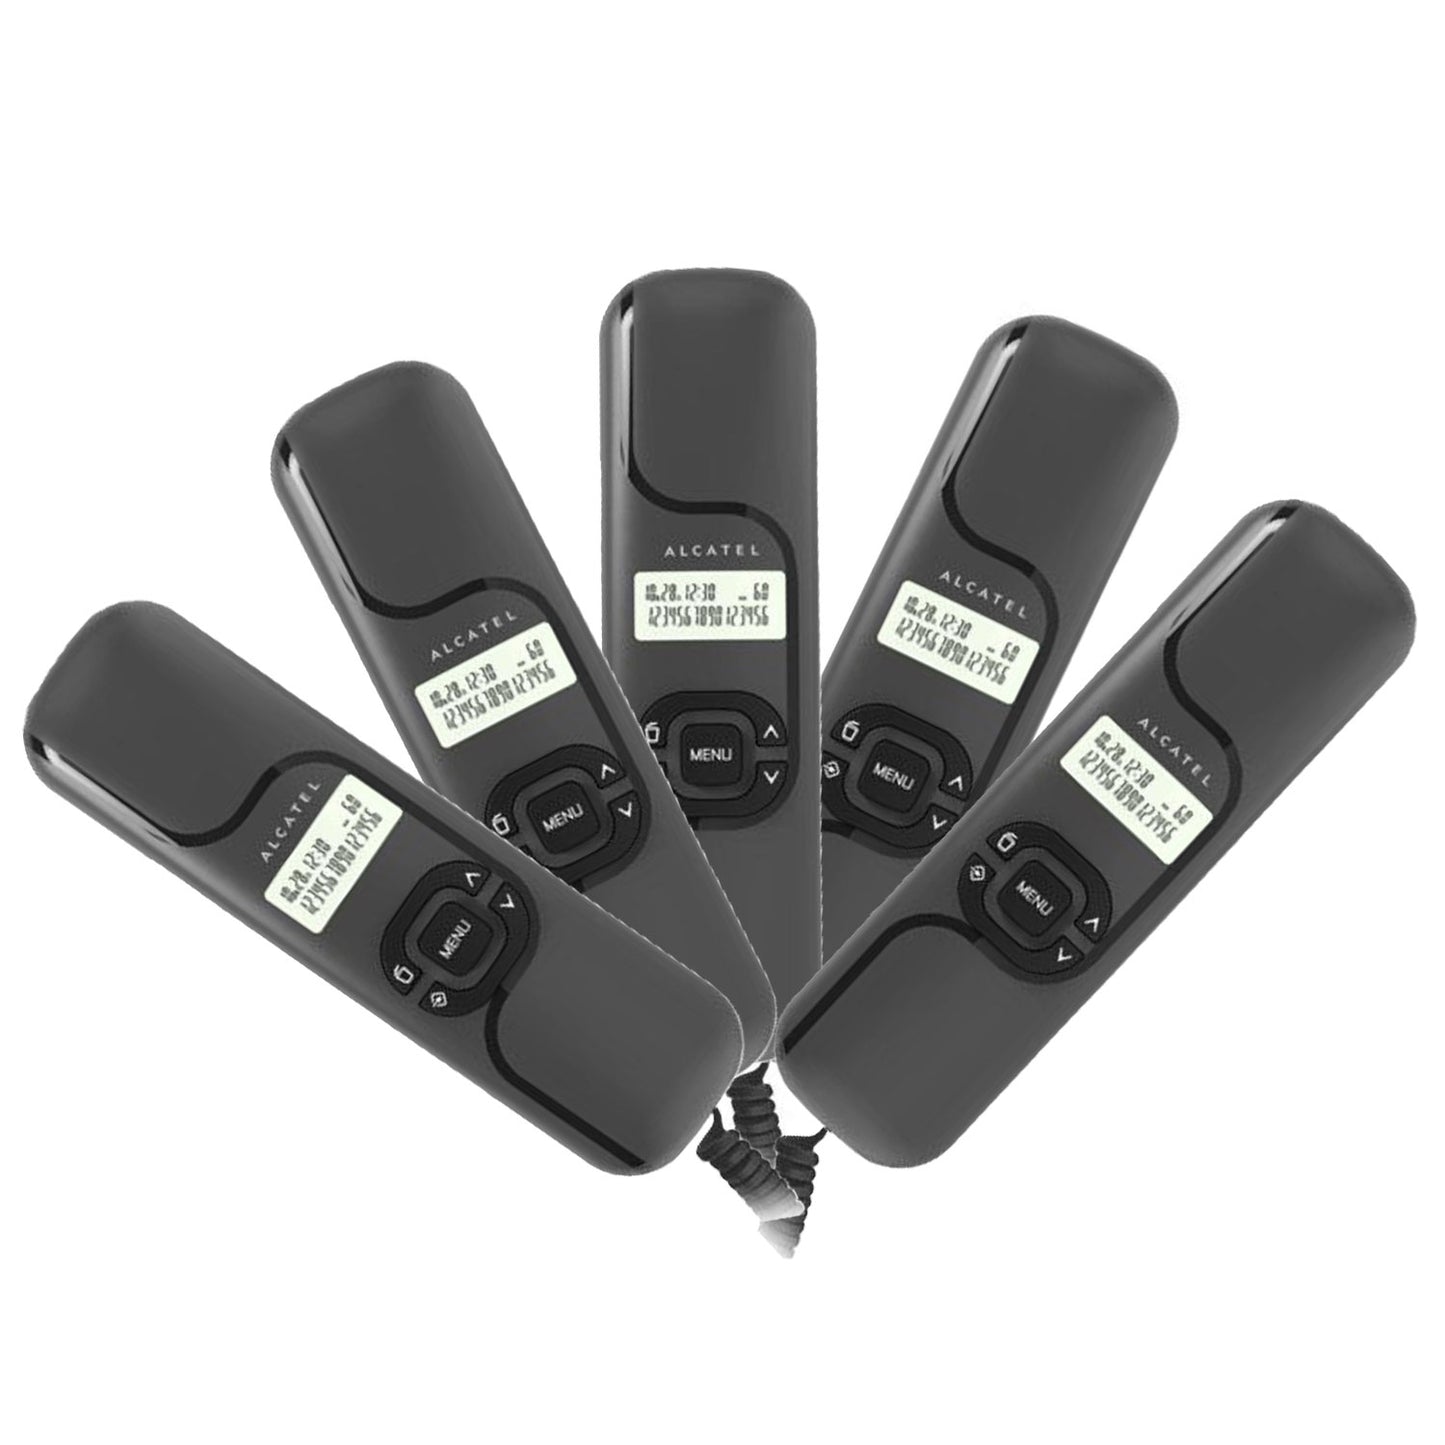 Alcatel T16 Ultra Compact Corded Landline Phone with Caller ID Wall Mounted Black (Pack Of 5)